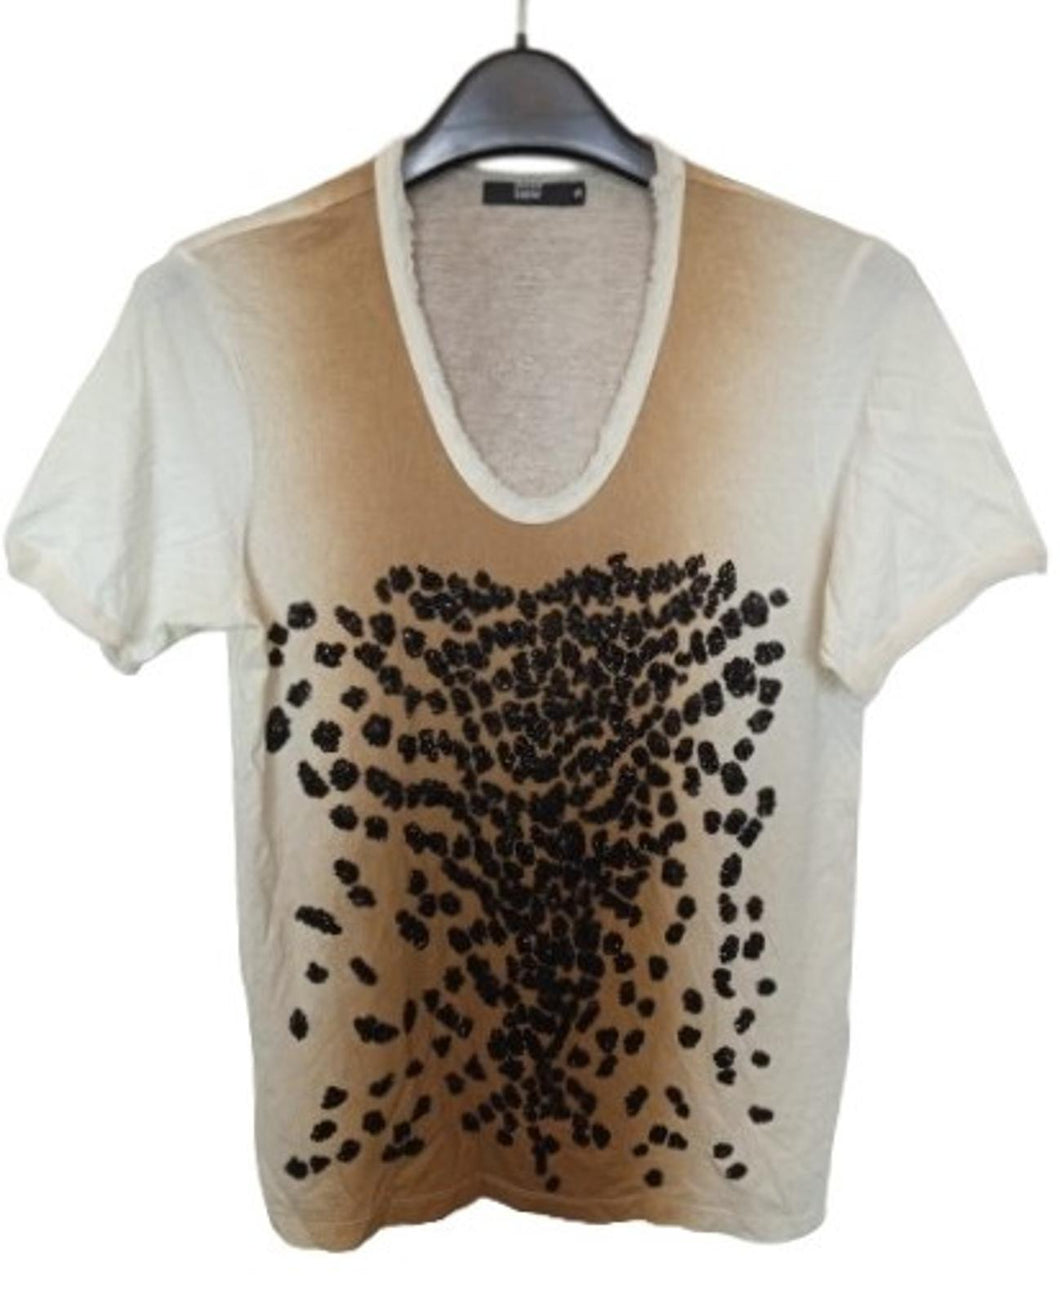 MARKUS LUPFER Ladies White & Brown Cotton Embroidered Frayed T-Shirt Size S